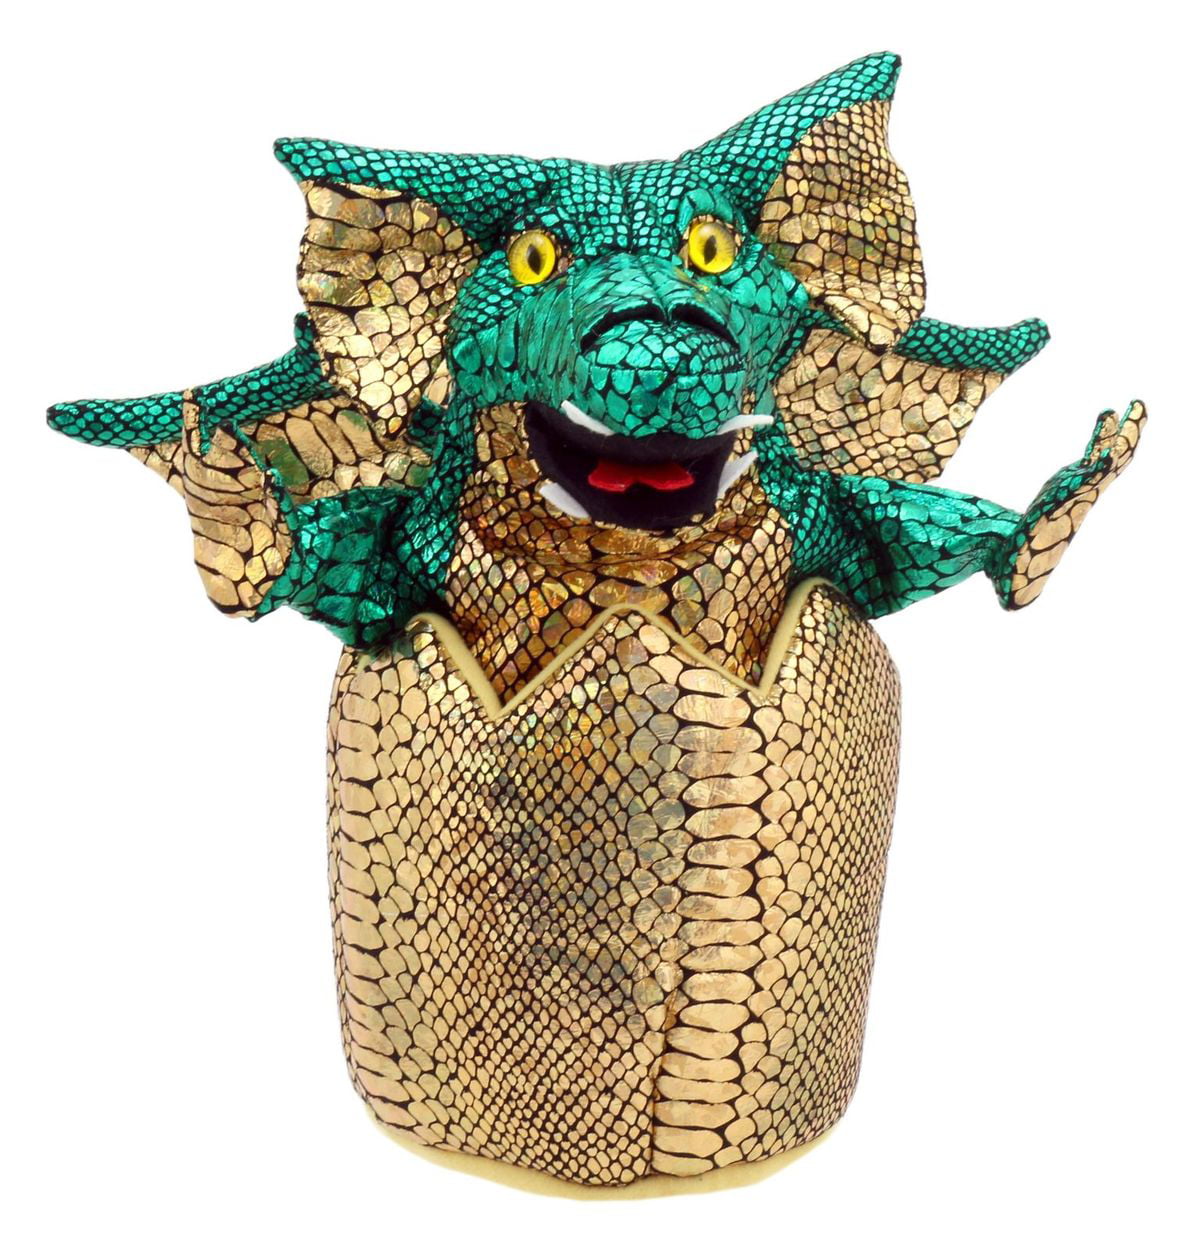 Baby Dragons in Eggs Green Dragon Puppet The Puppet Company